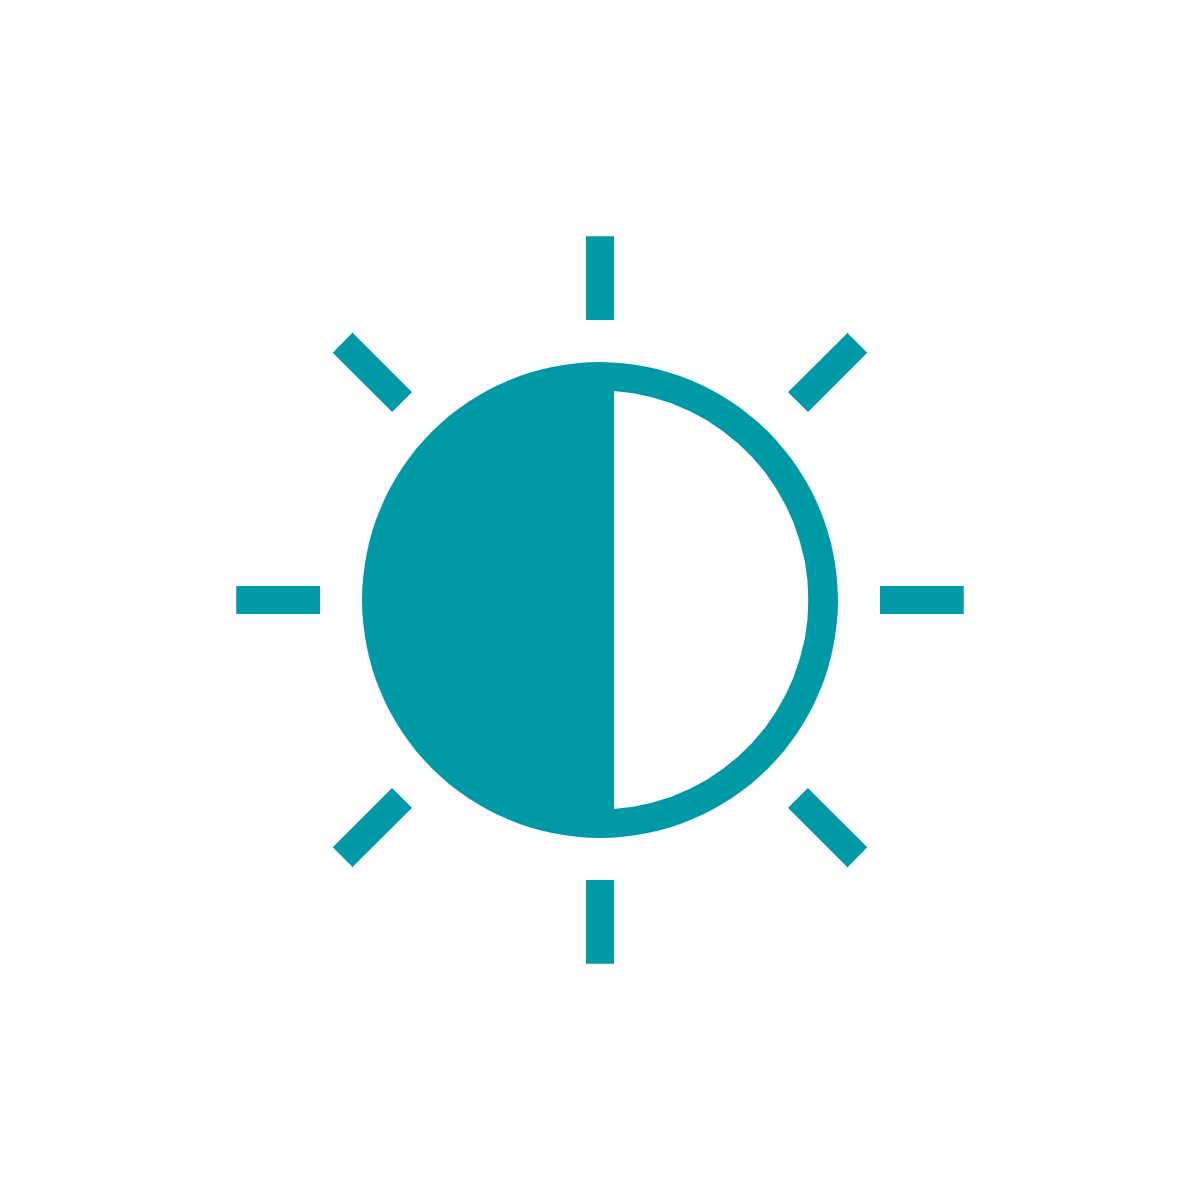 Green icon of sun with rays, half colored in